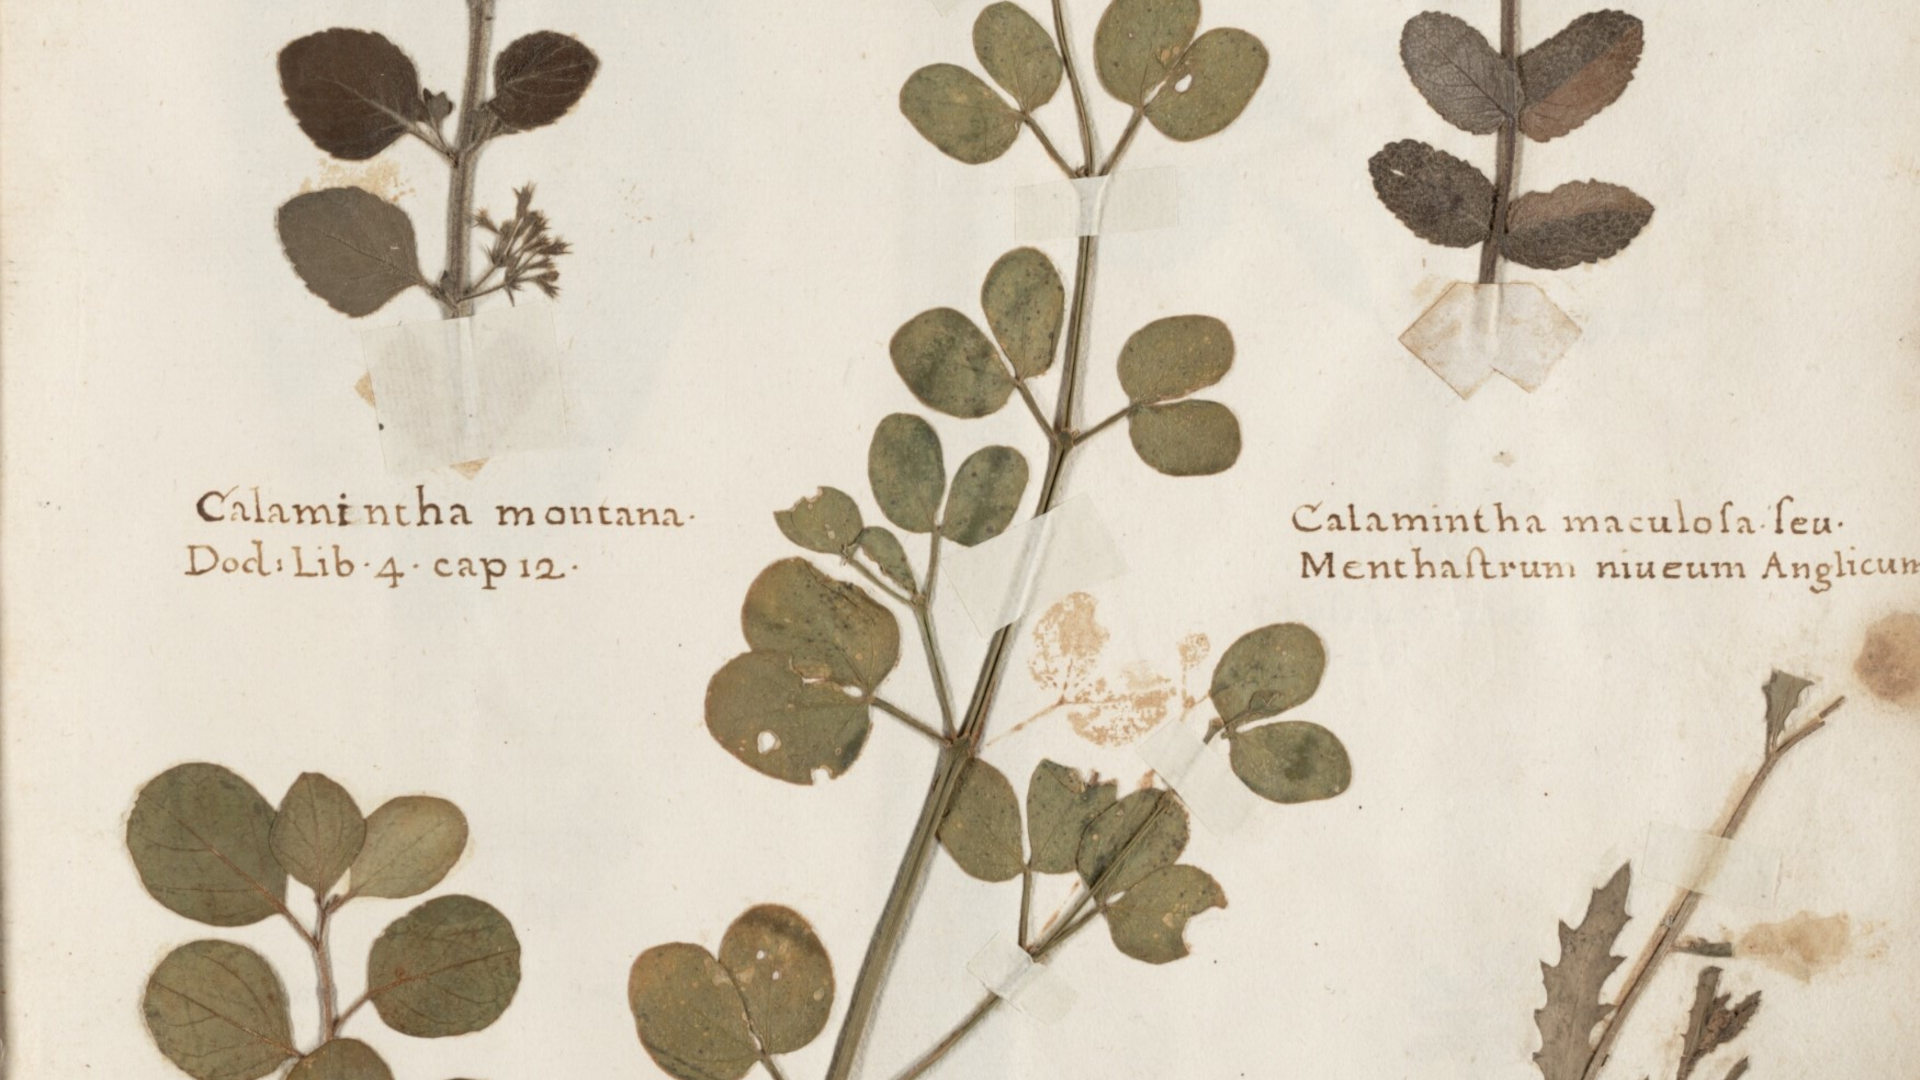 A page from a herbarium book by Bernardus Wynhouts in 1633.